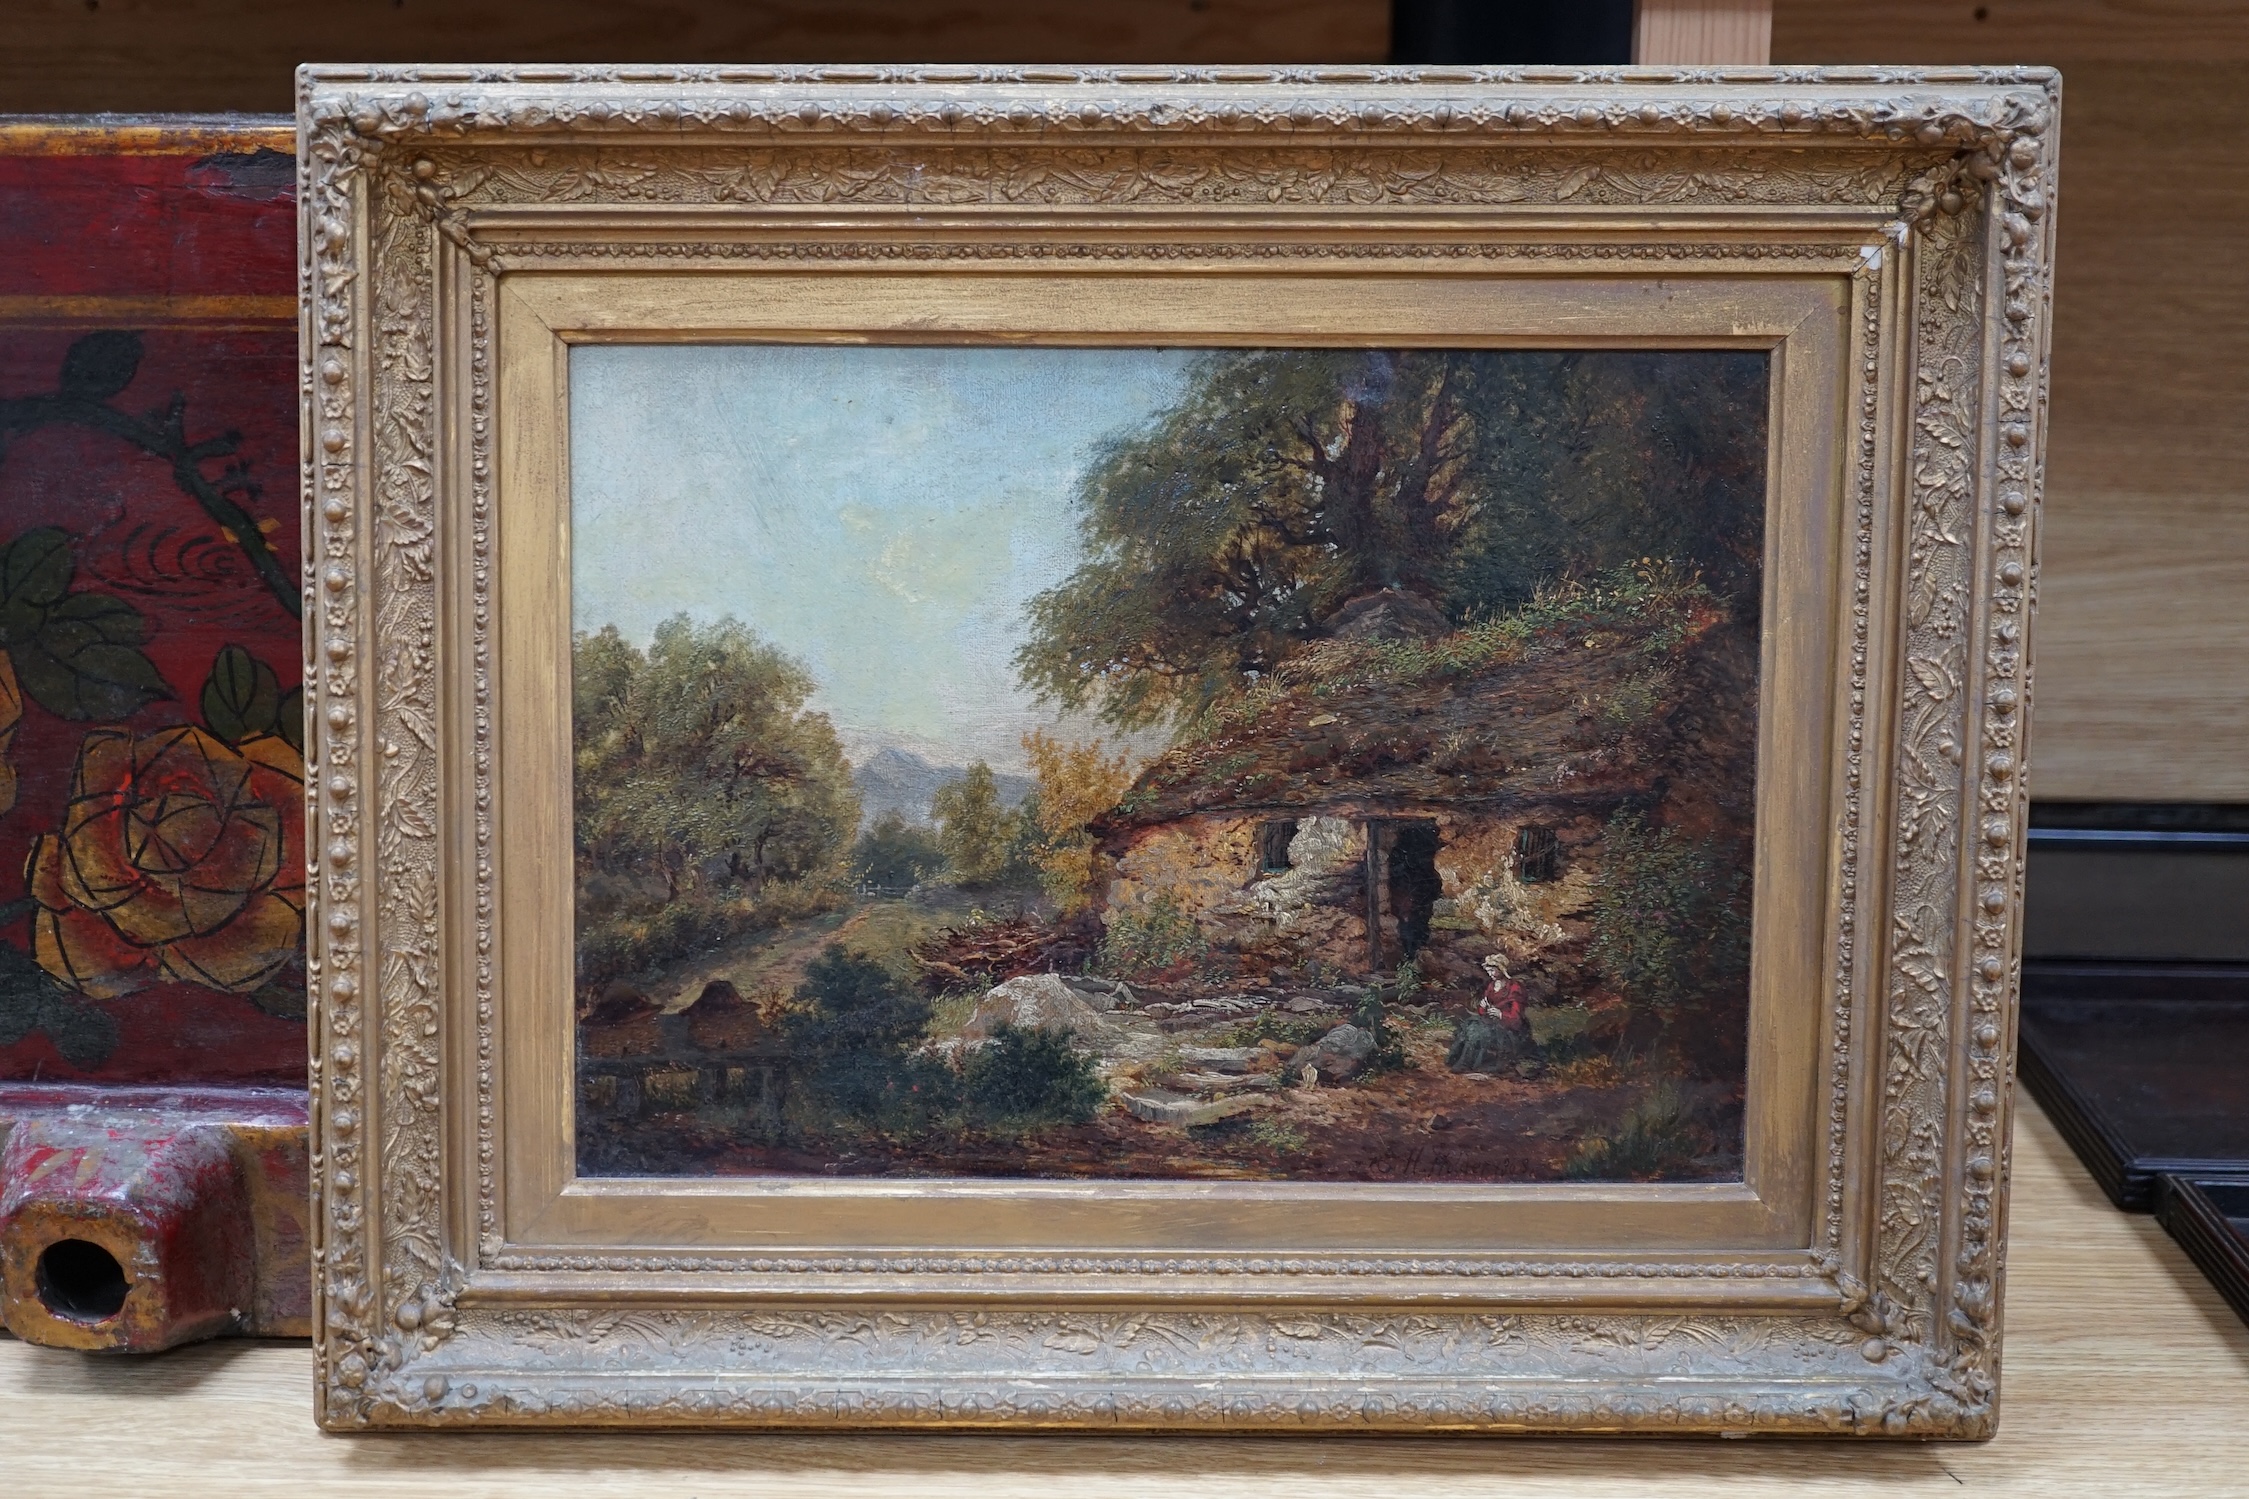 Edward Henry Holder (1847-1922), oil on board, Scottish crofter’s homestead, signed and dated 1868, 24 x 34cm, ornate gilt frame. Condition - fair